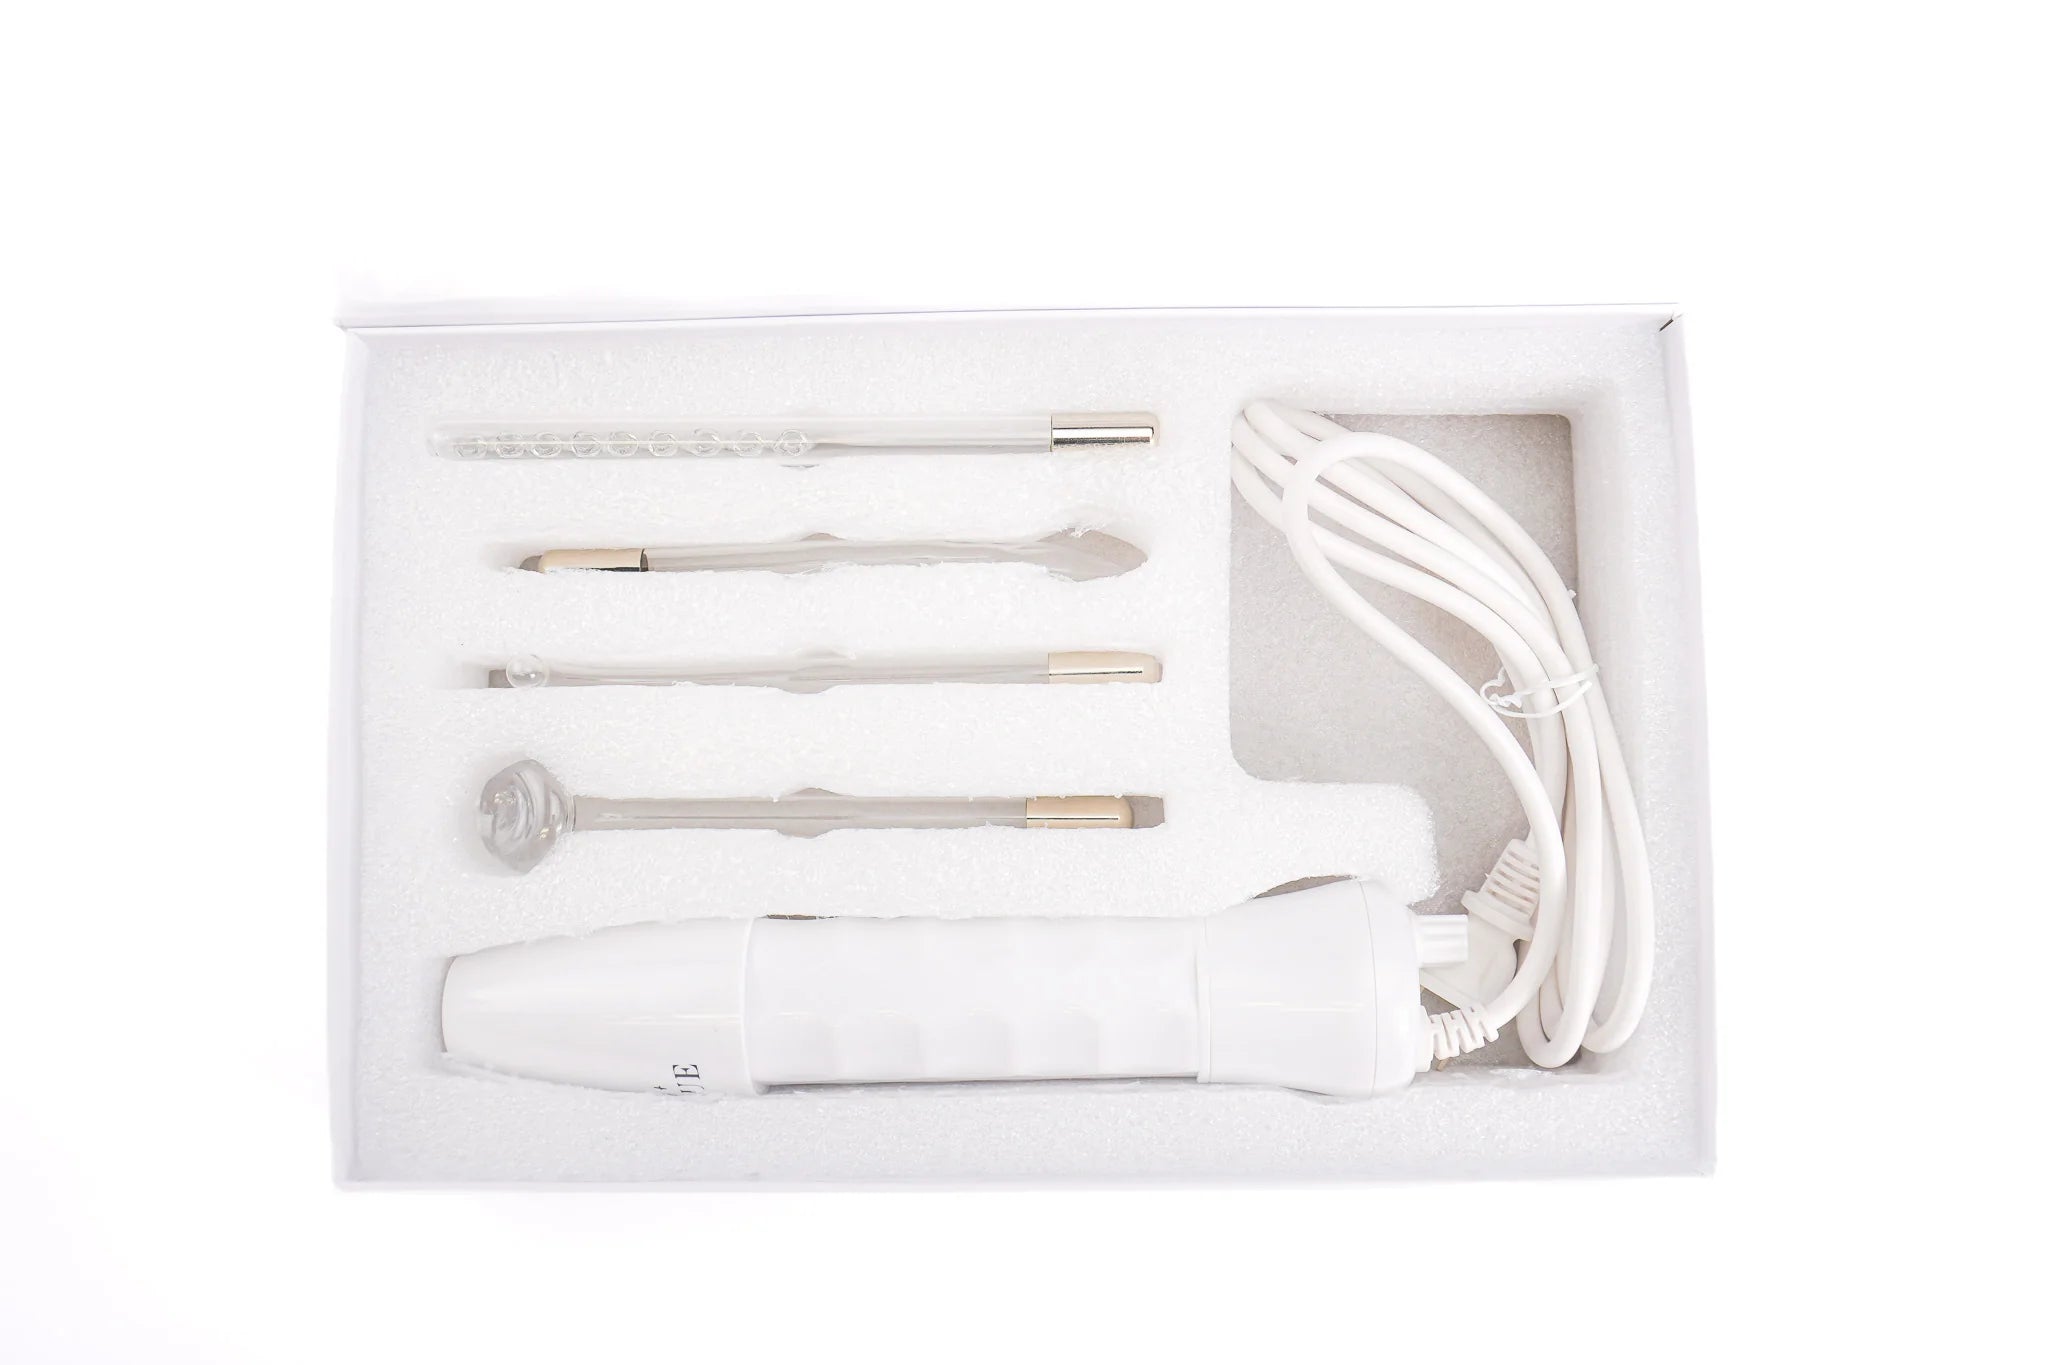 High Frequency Skin Therapy Wand